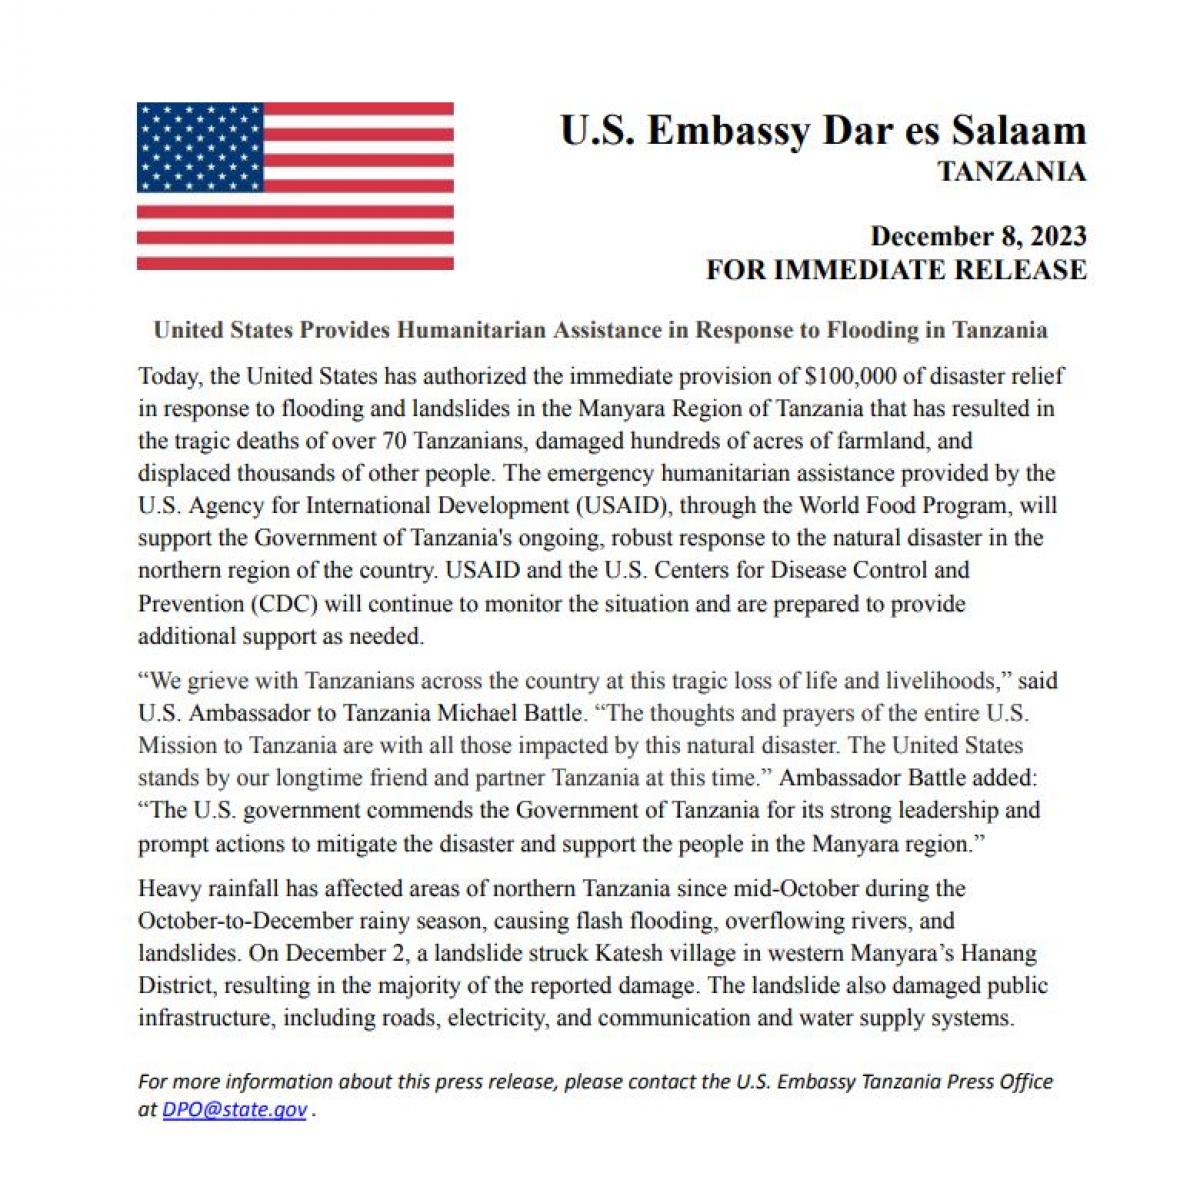 United States Provides Humanitarian Assistance in Response to Flooding in Tanzania